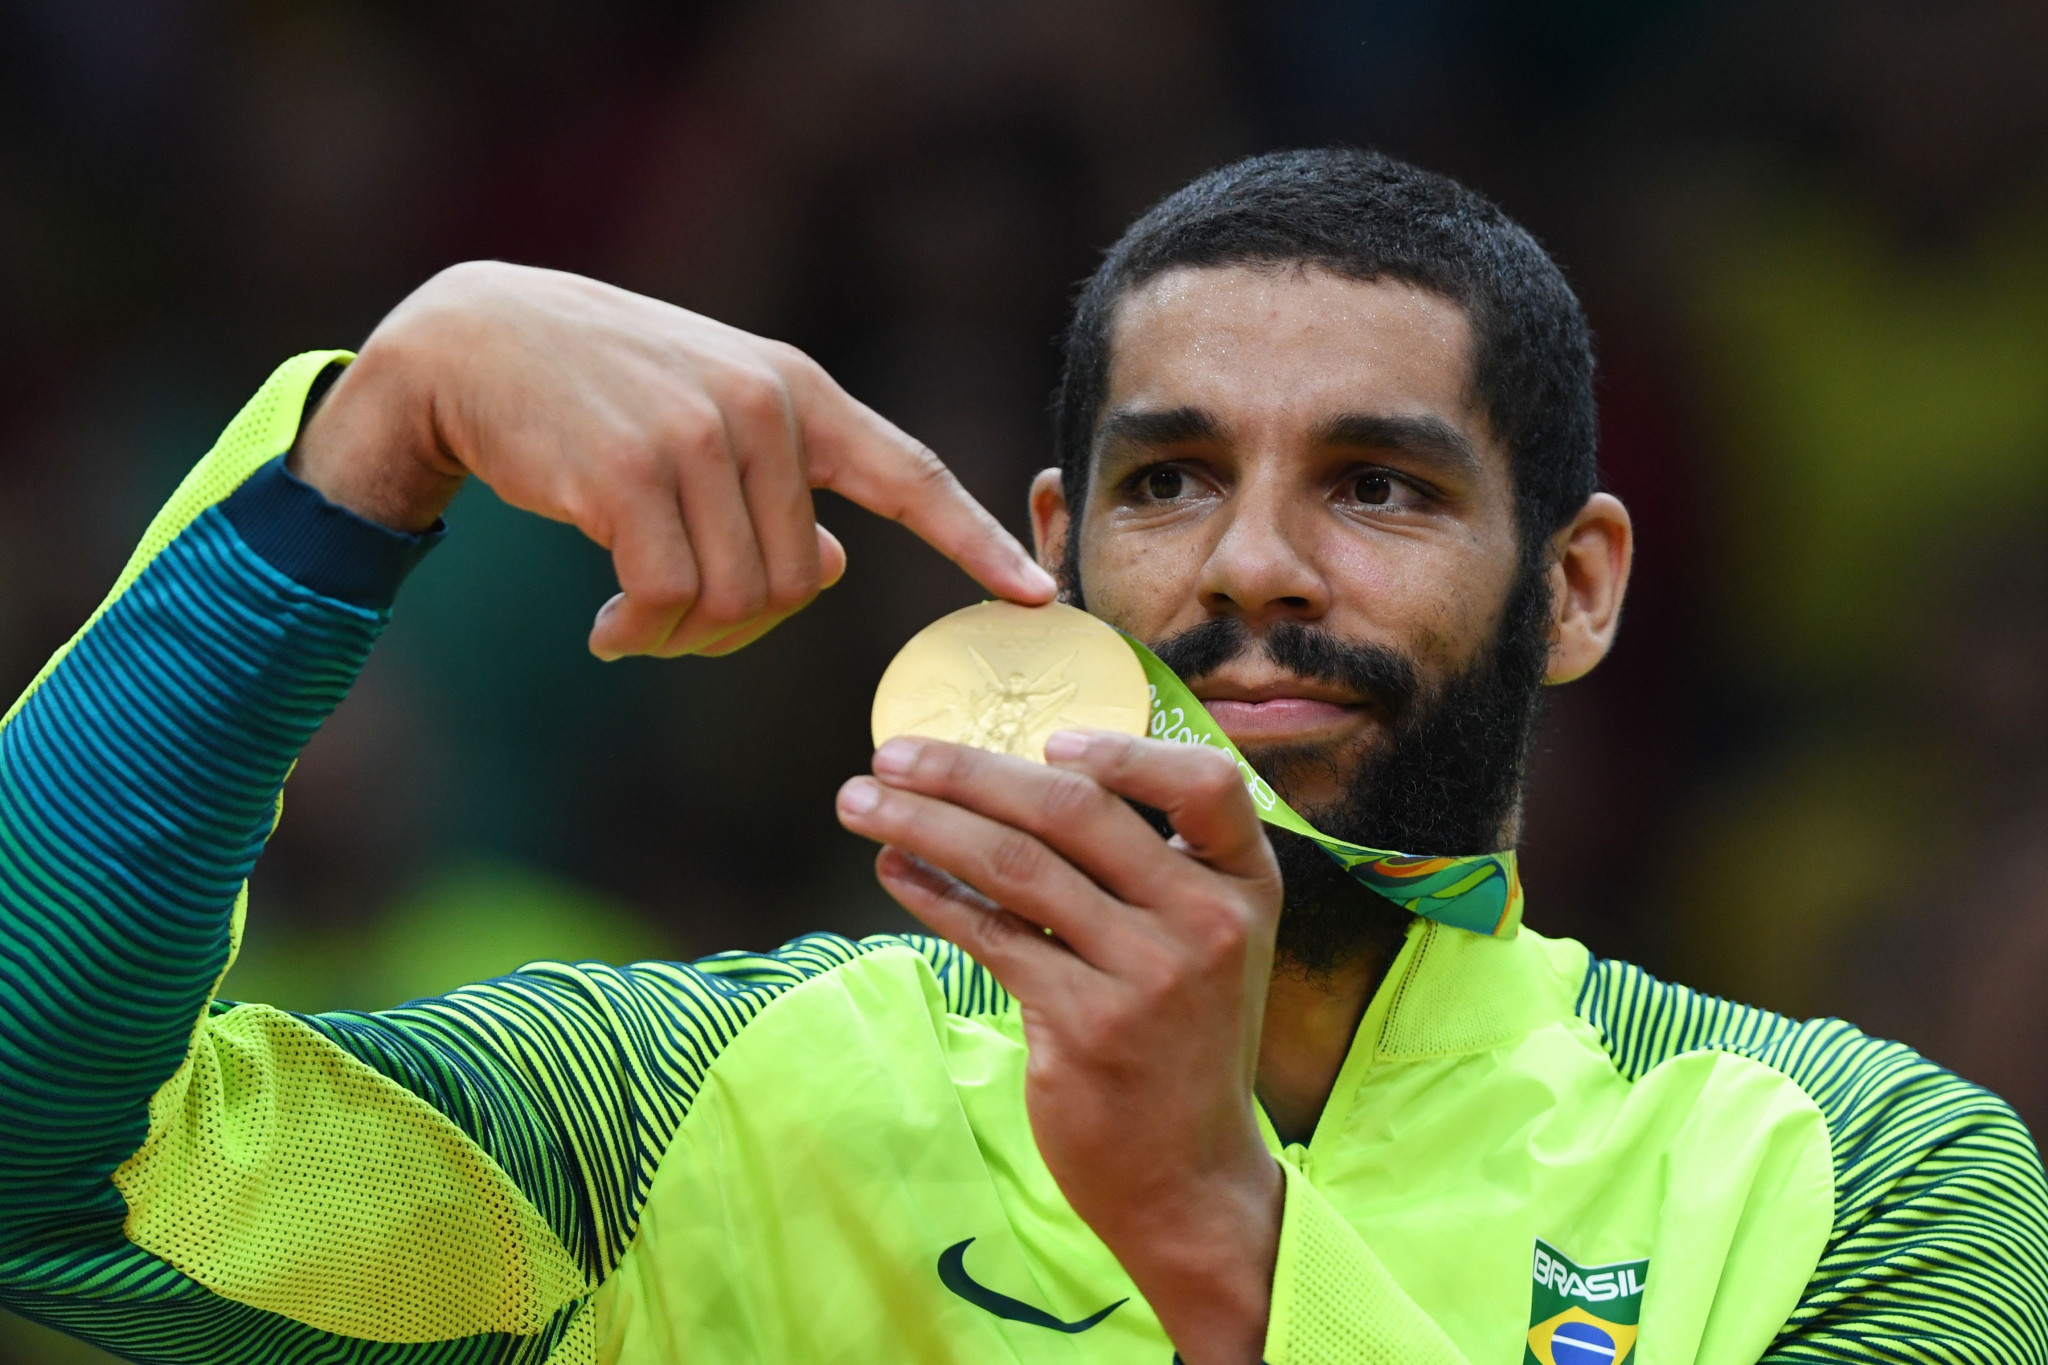 Brazilian Olympic volleyball gold medallist Wallace Leandro de Souza has been banned for five years for inciting violence against the President on social media ©Getty Images